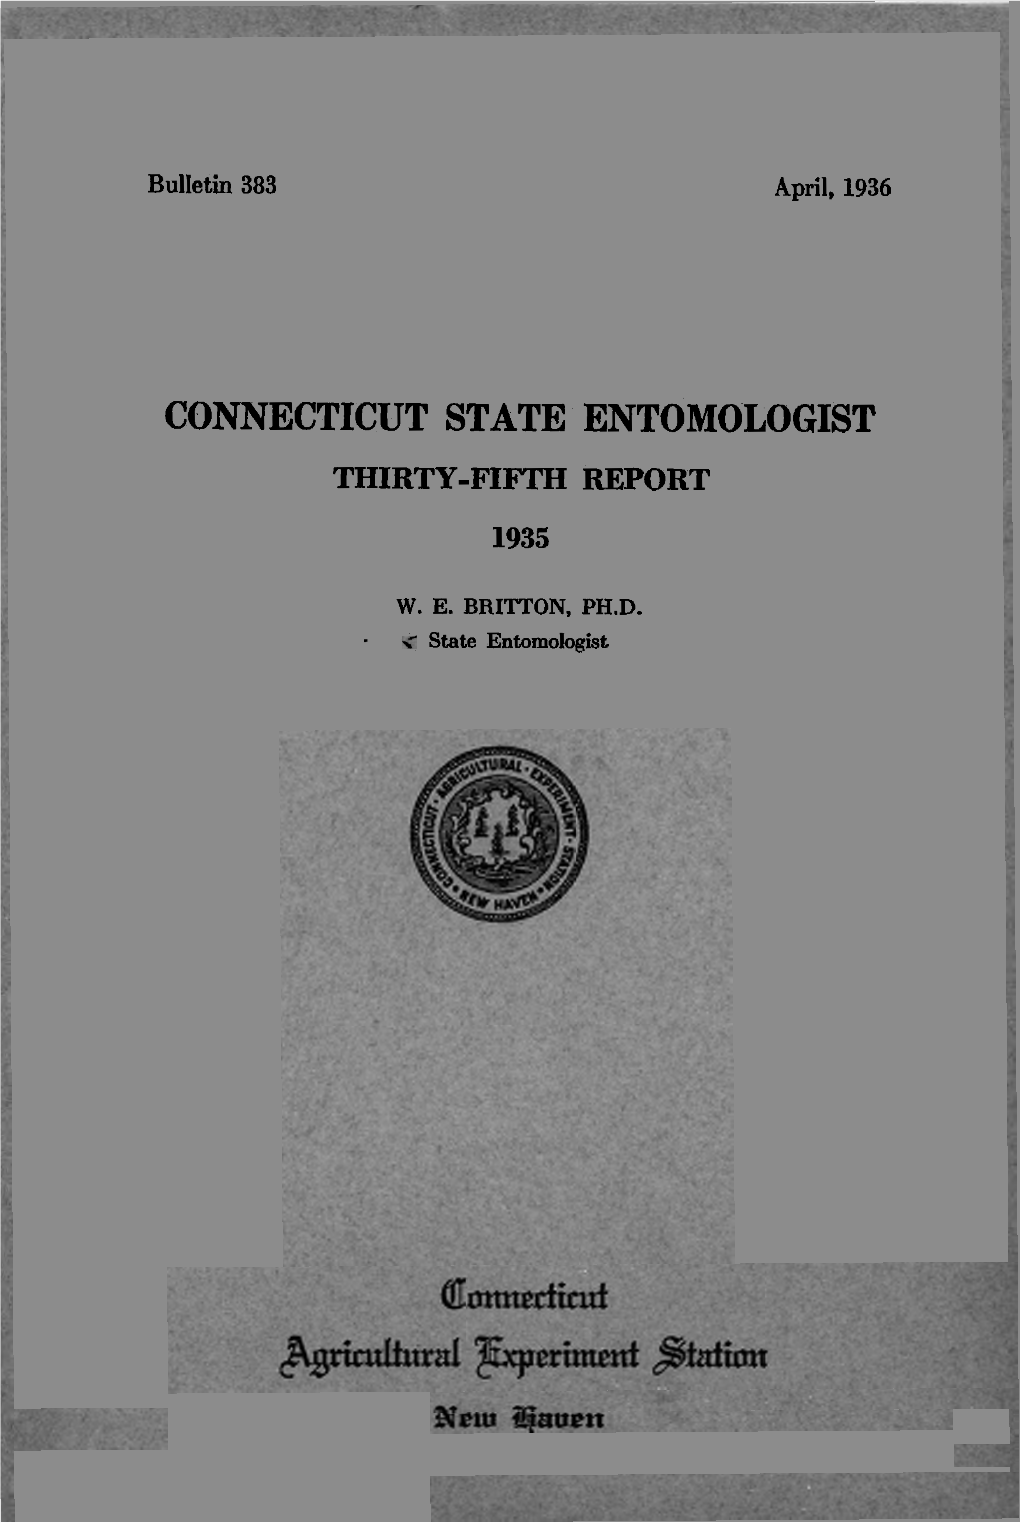 Connecticut State Entomologist. Thirty-Fifth Report 1935